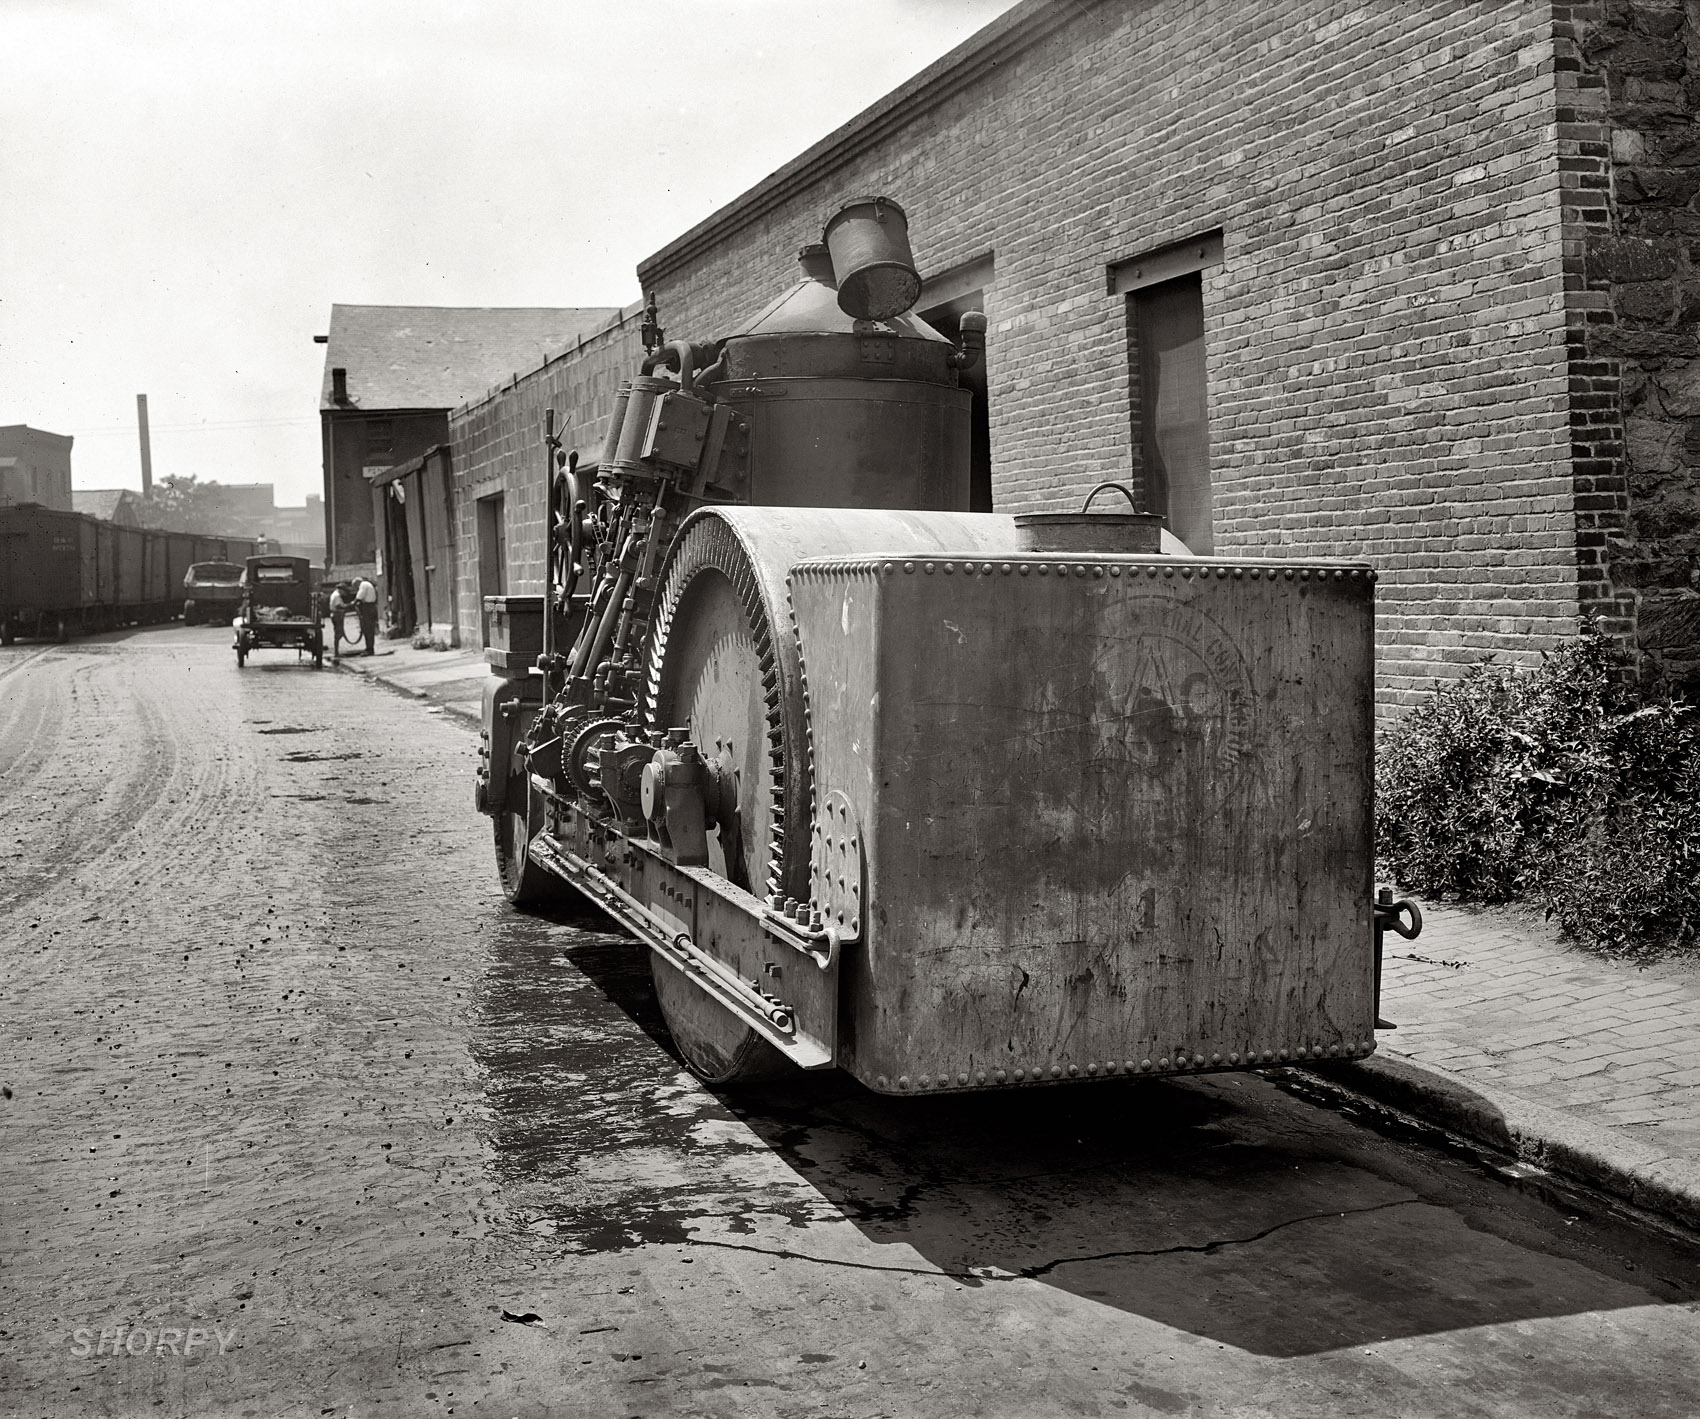 "Crawford Paving Co." The third and final image from this series showing a Barber steamroller circa 1925. National Photo Company glass negative. View full size.